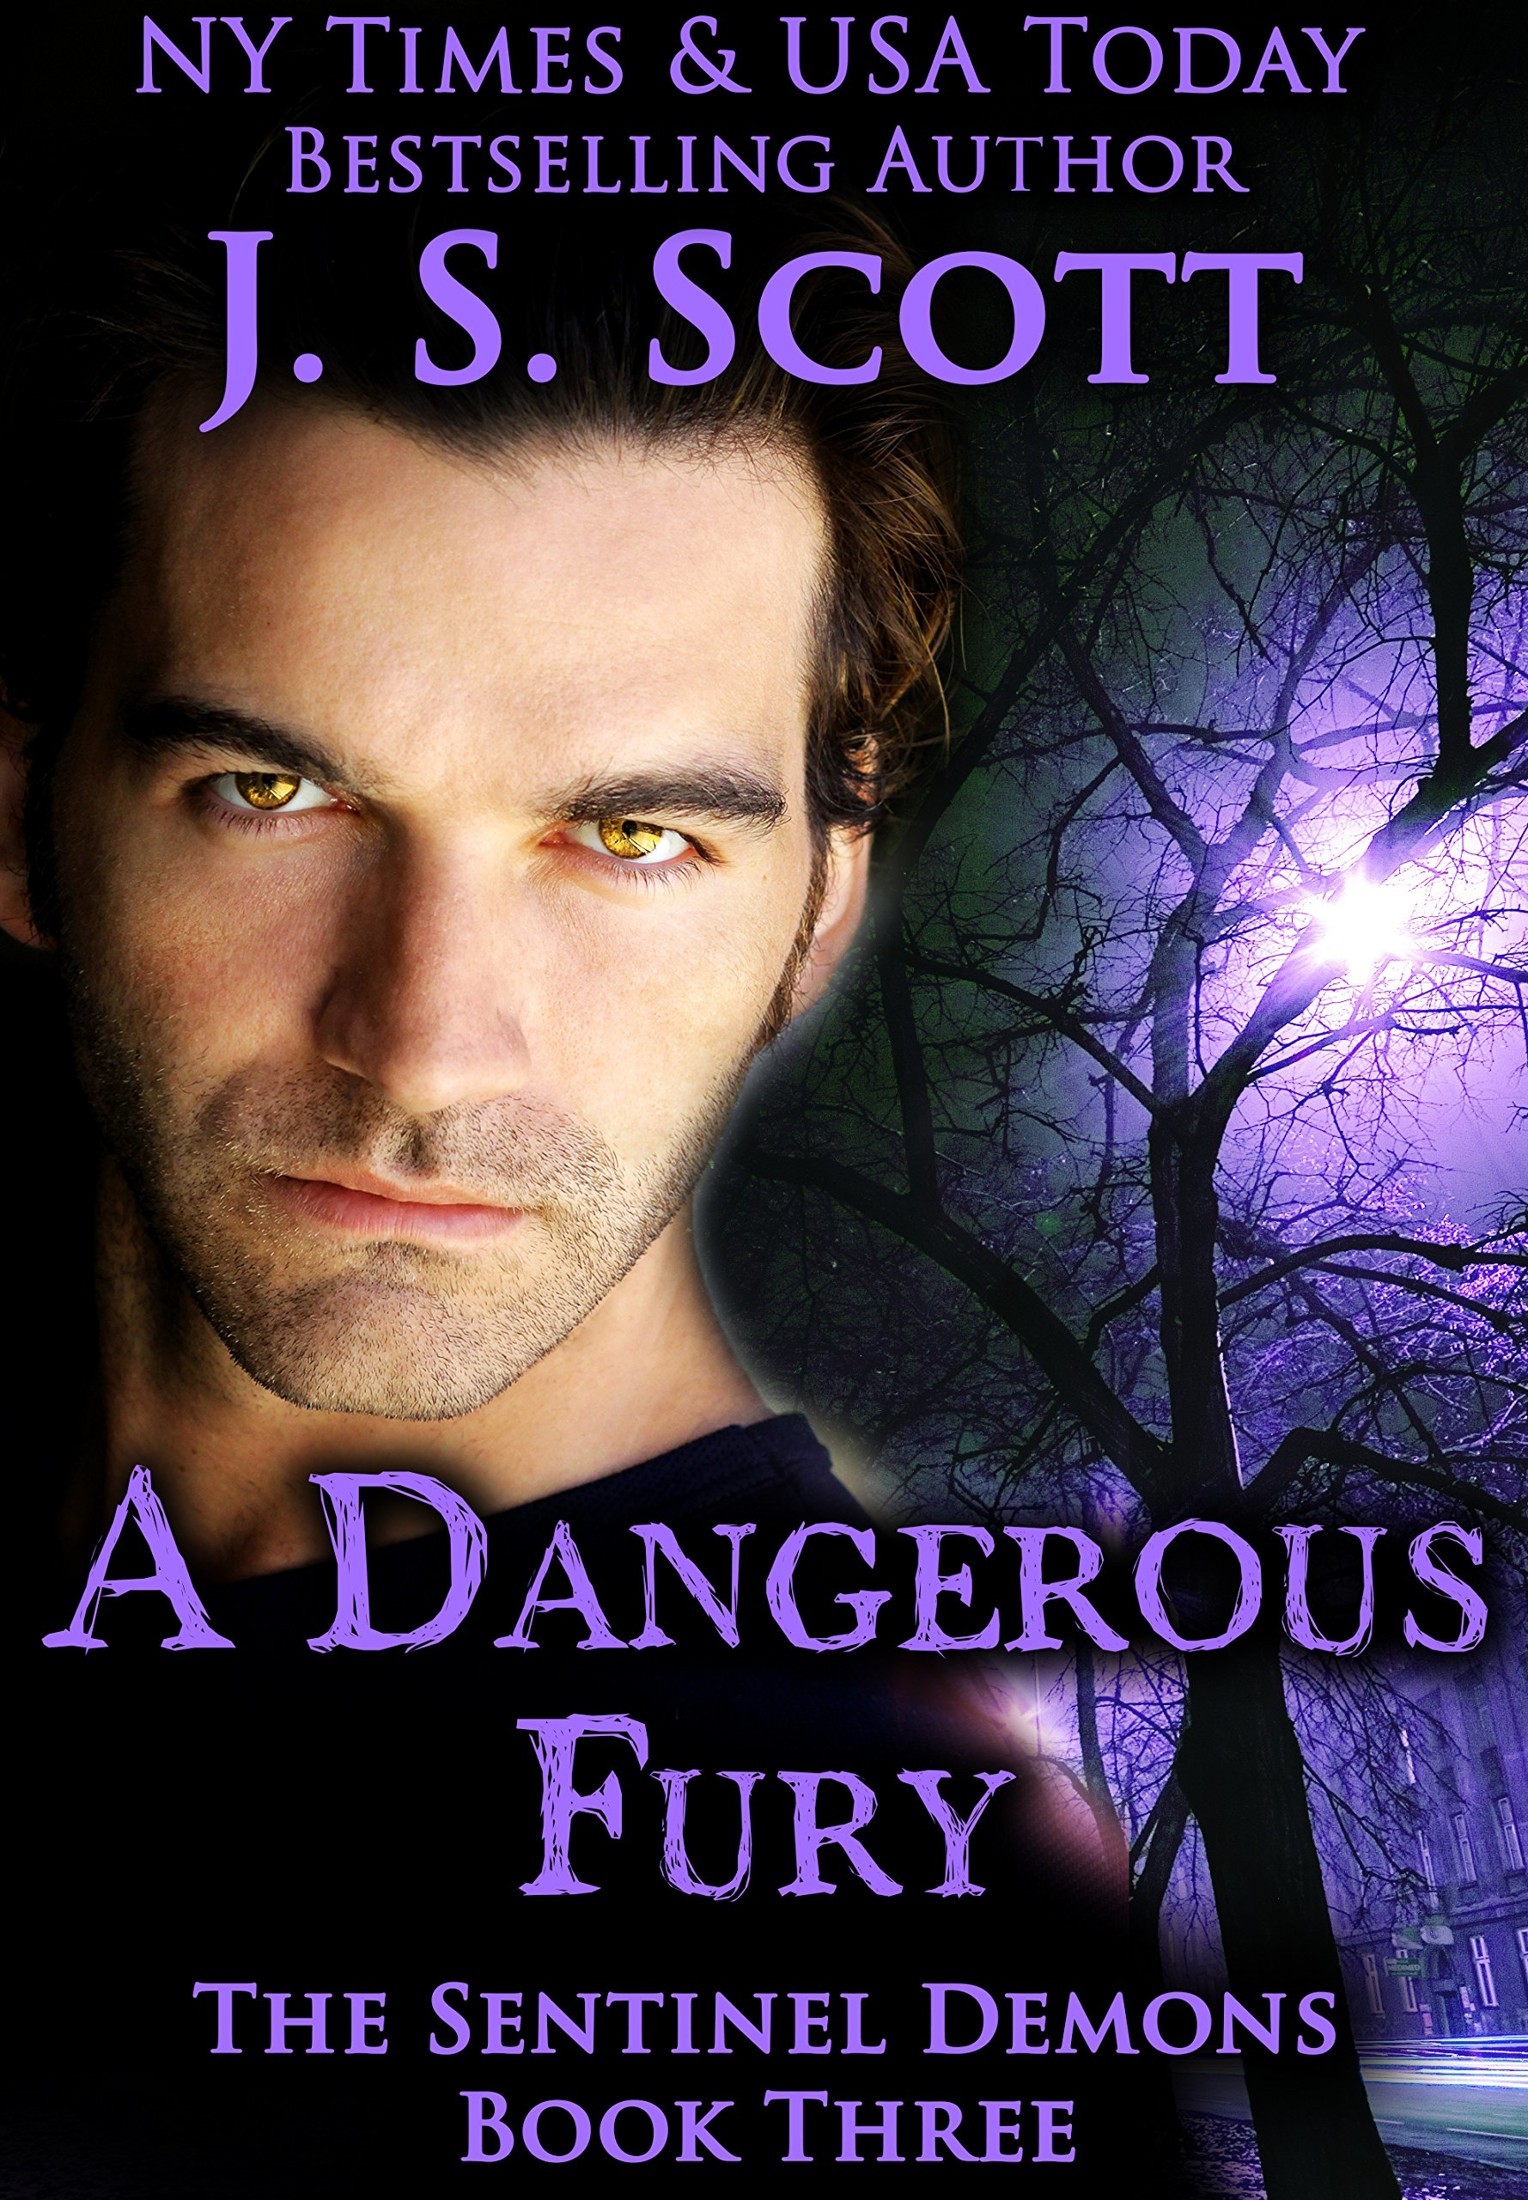 A Dangerous Fury (The Sentinel Demons Book 3)